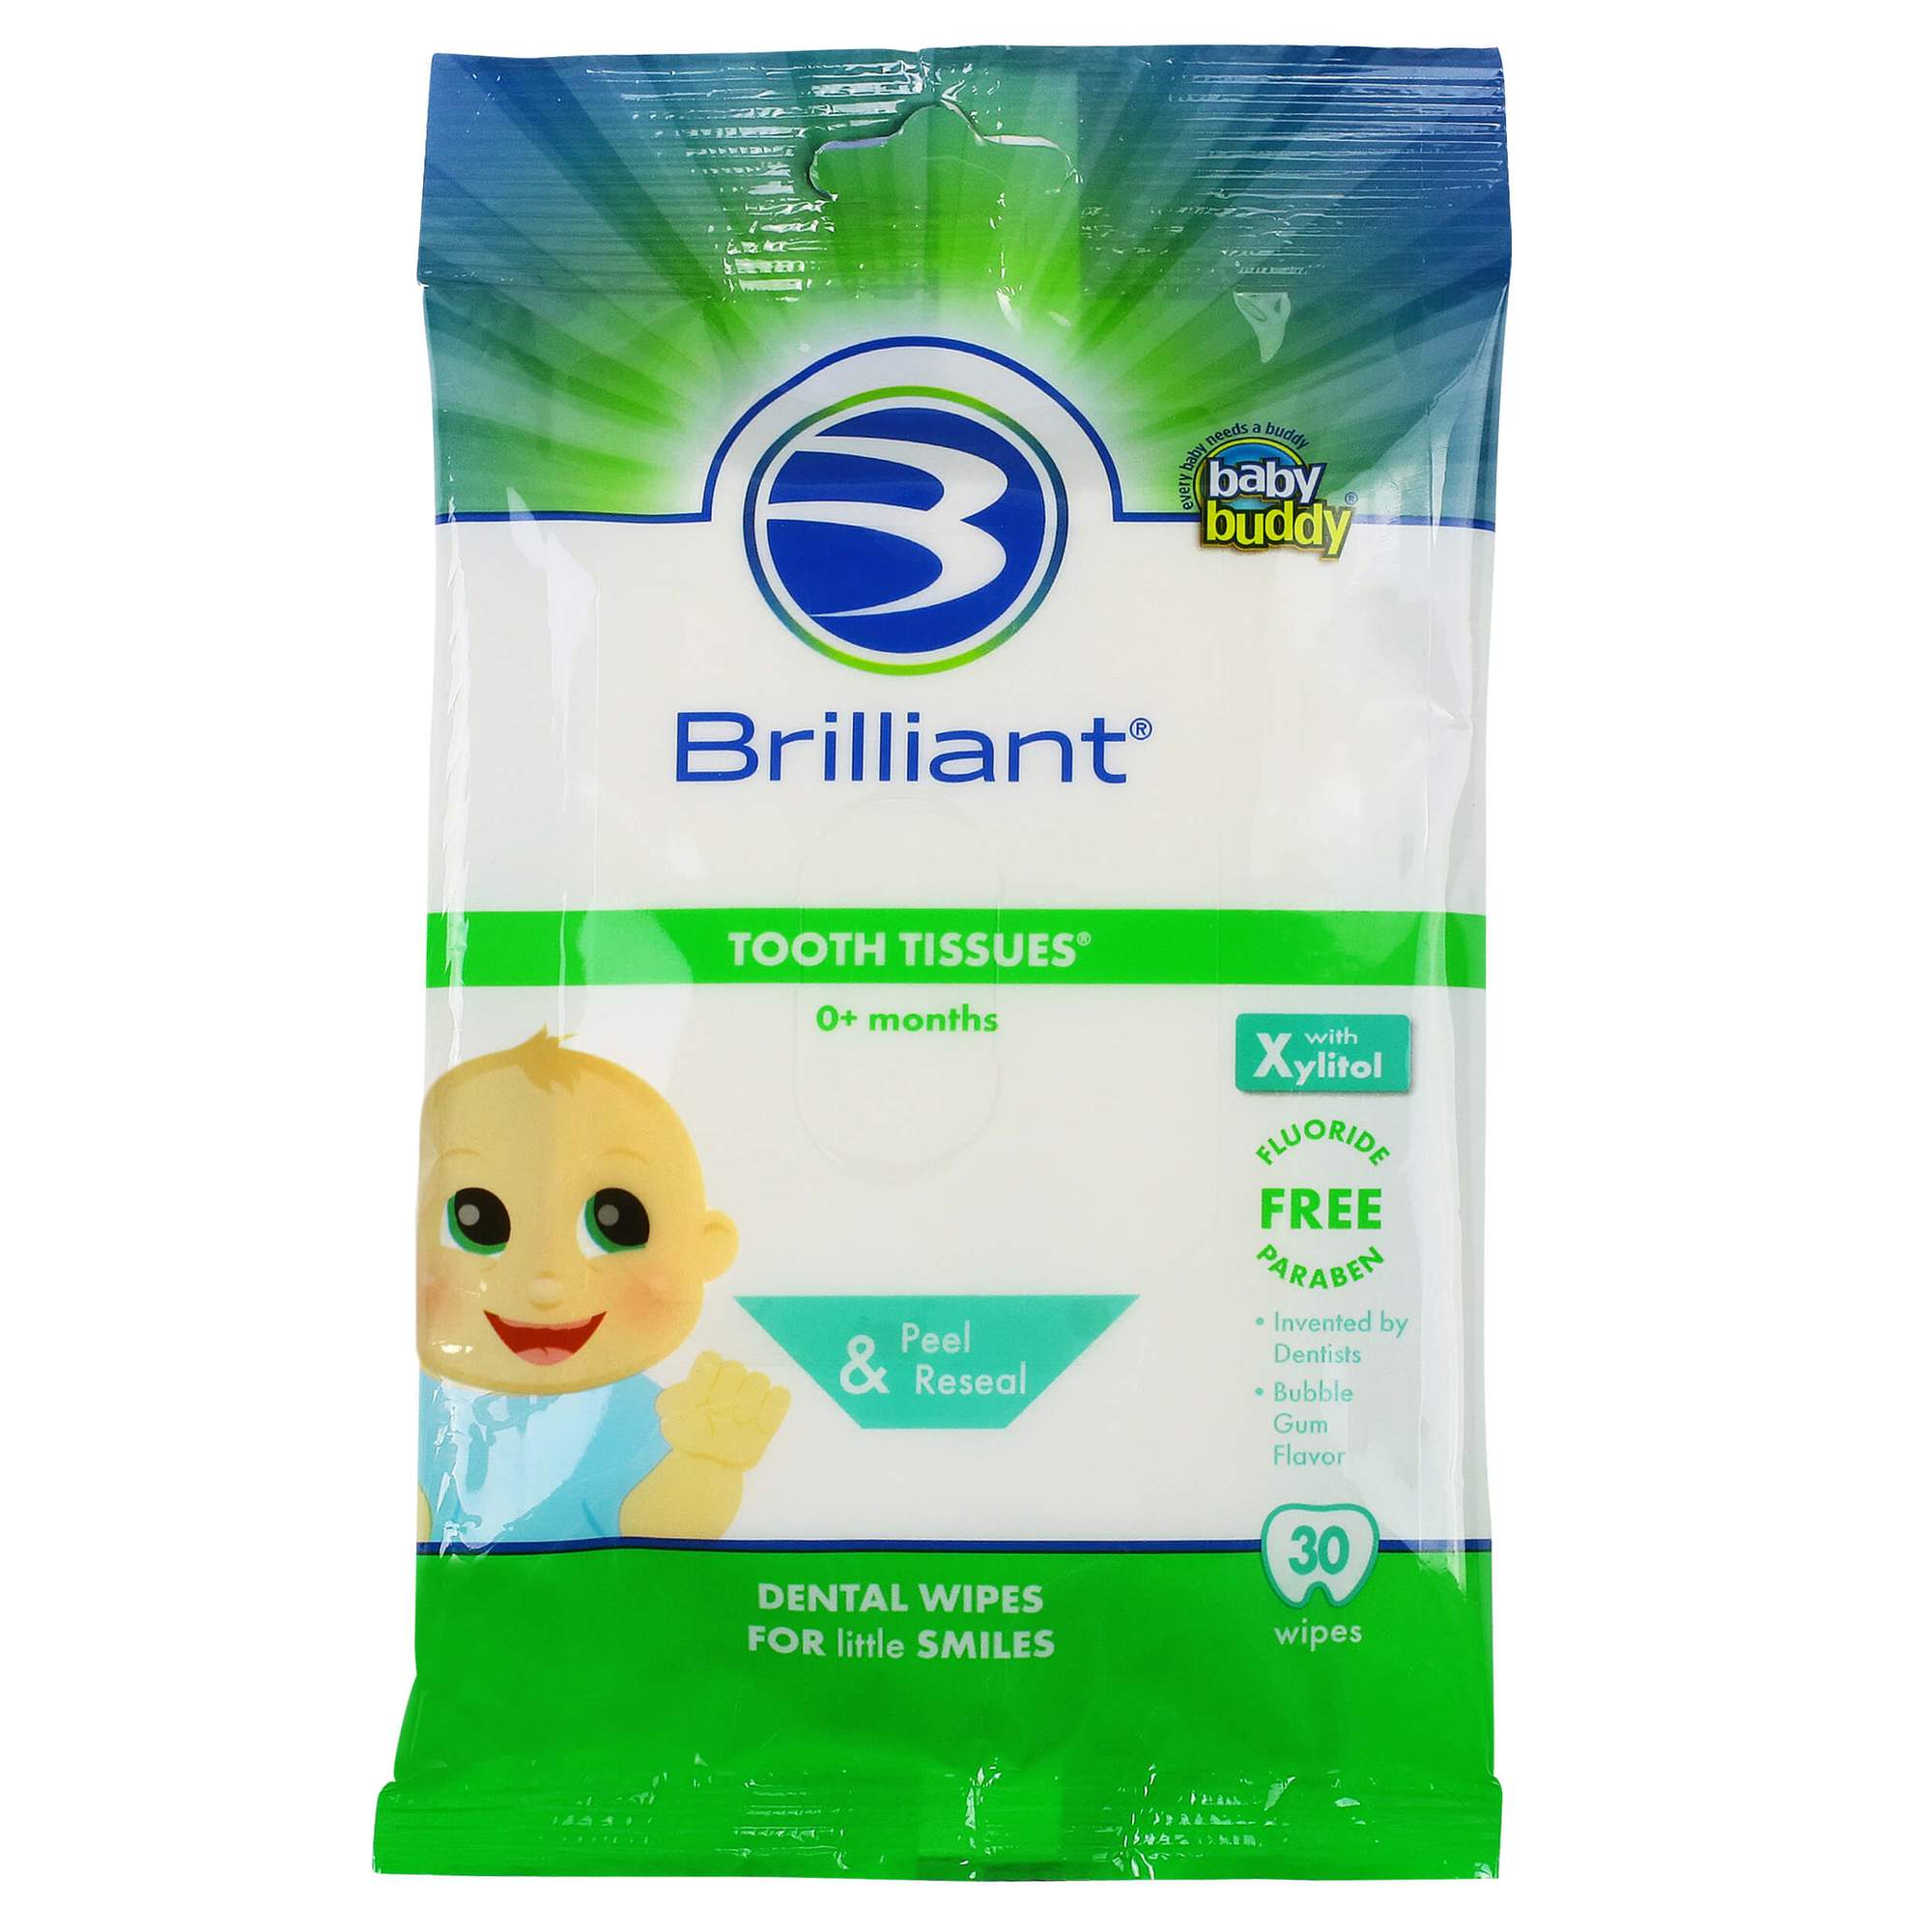 Baby Buddy Tooth Tissues 30 ct